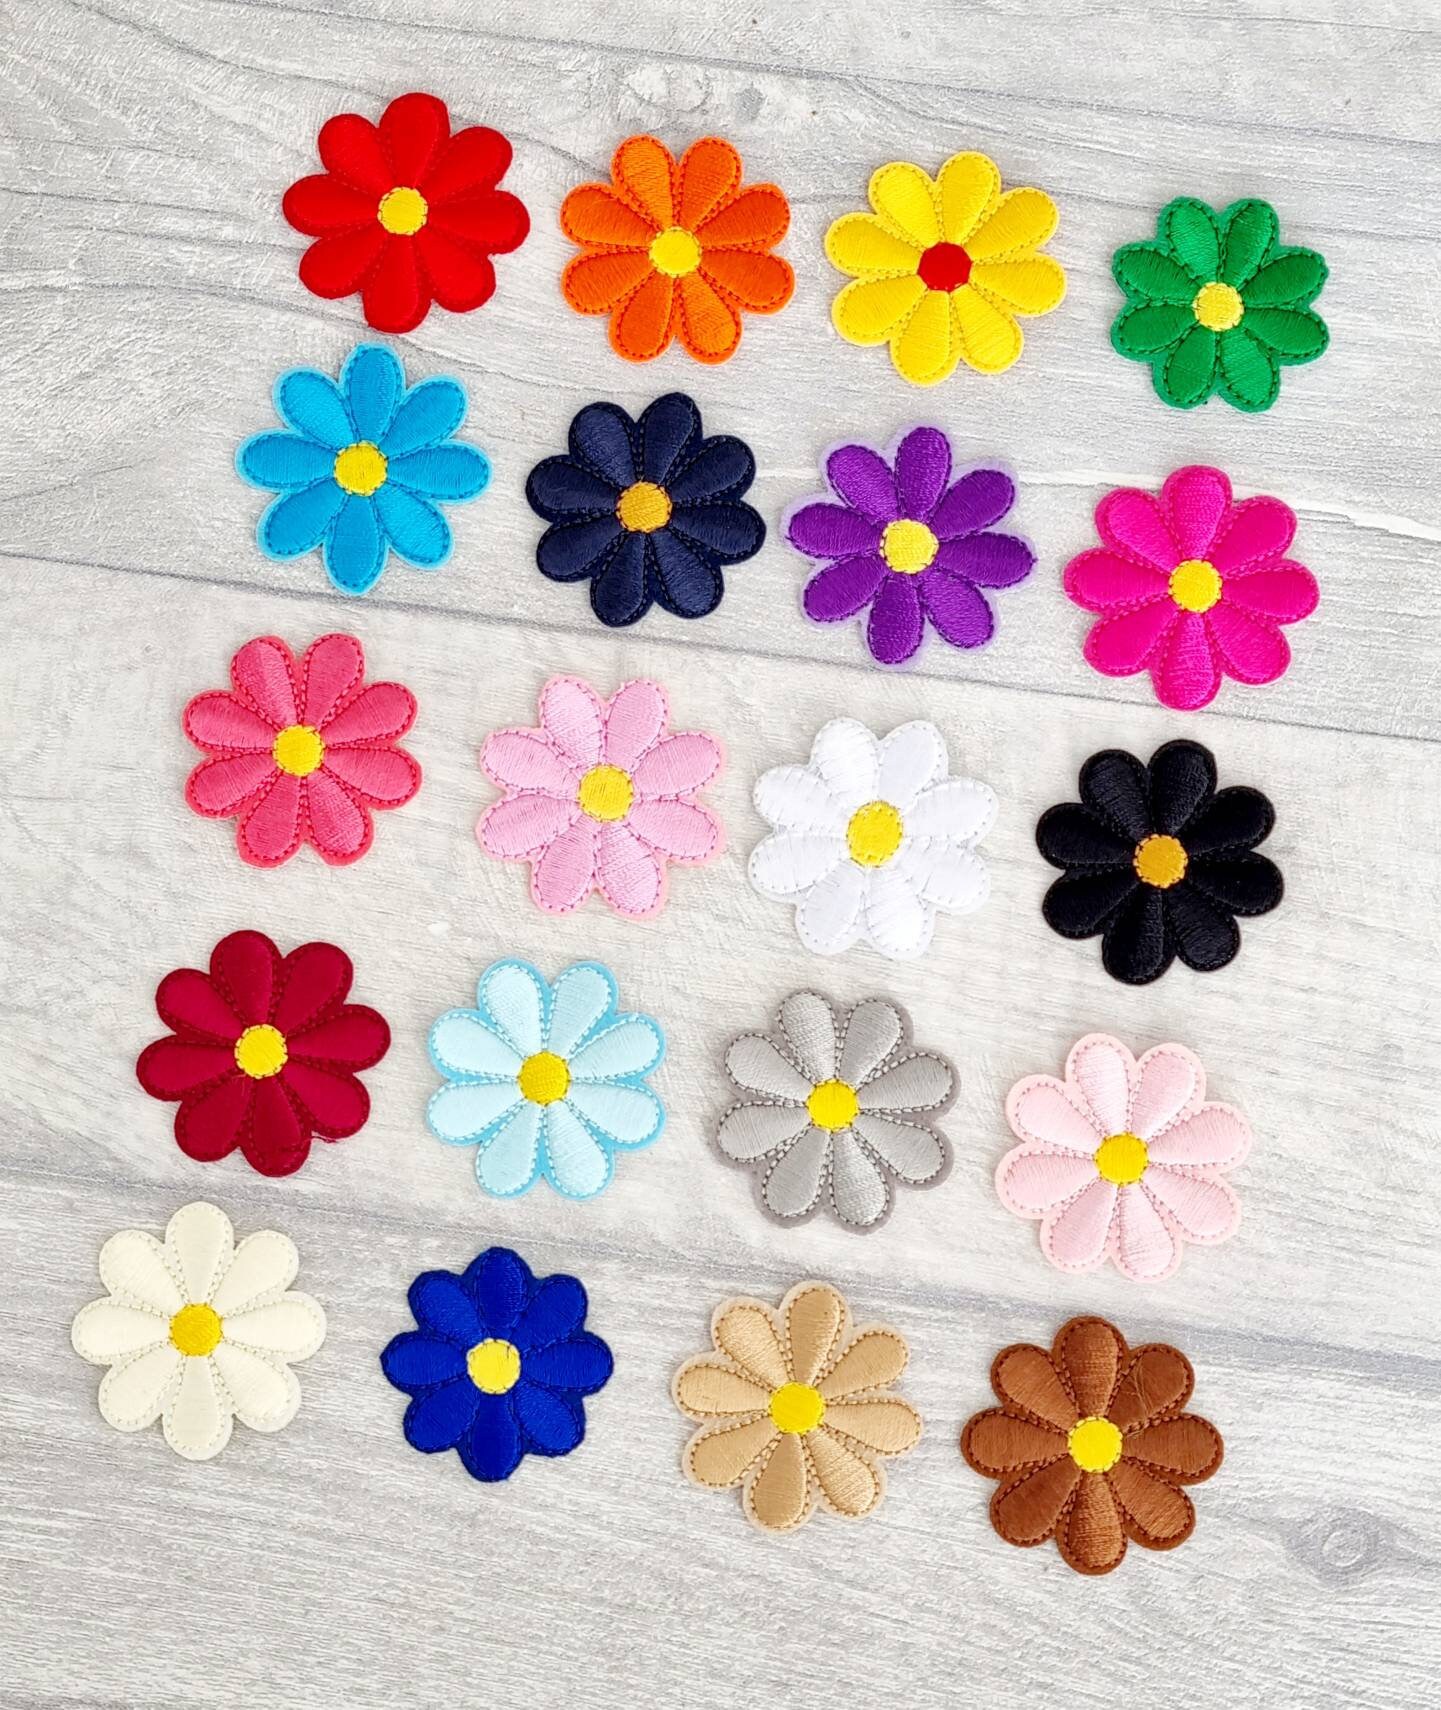 8 PCS EMBROIDERED Flower Iron on Patches Embroidered Applique Sewing  Patches A0 $8.80 - PicClick AU